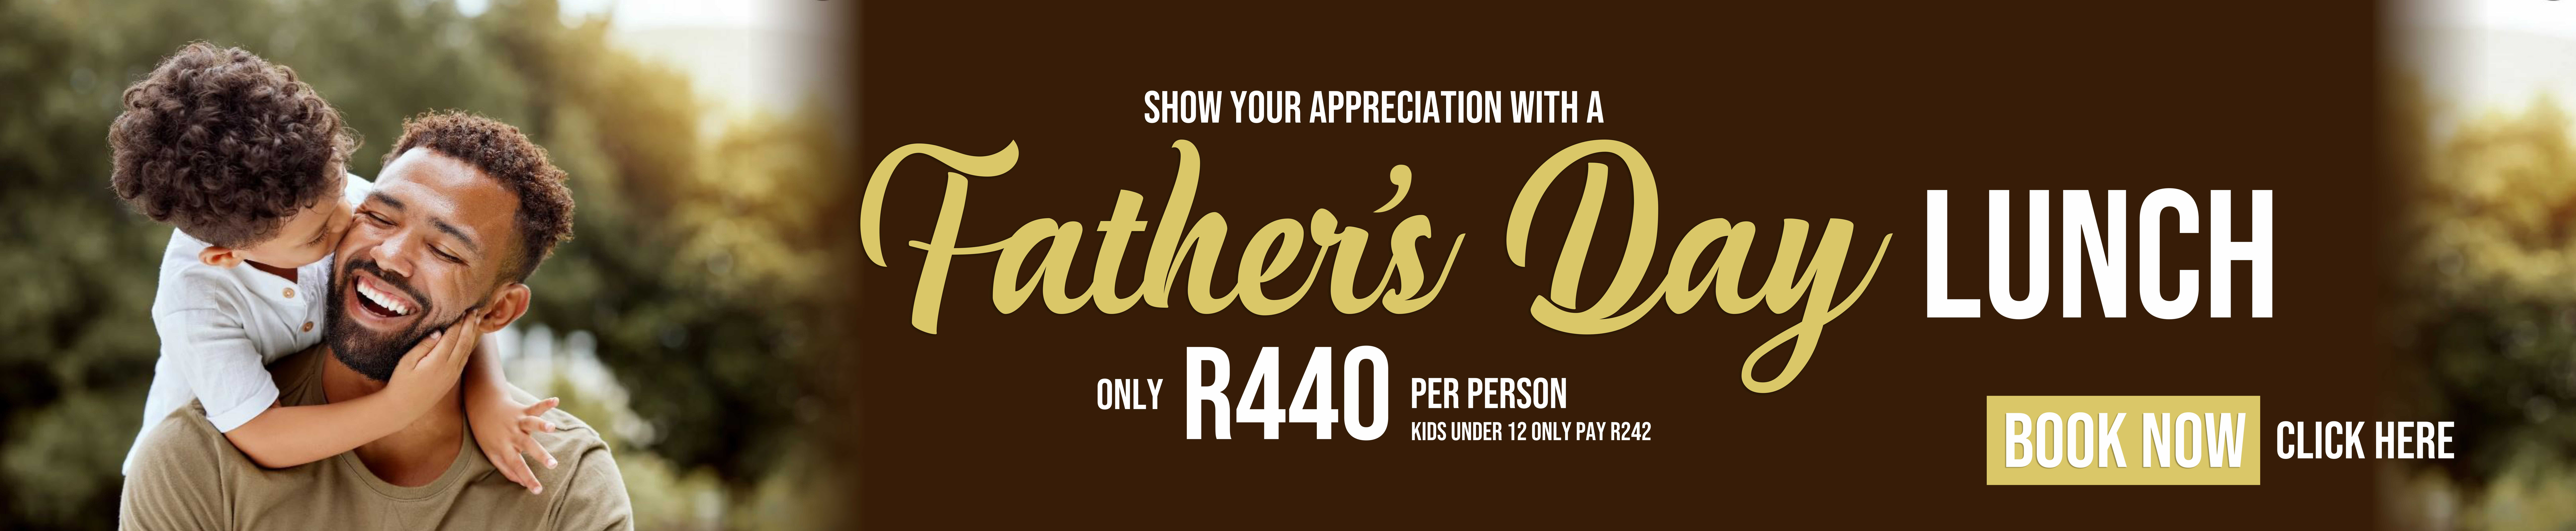 Misty Hills Country Hotel Fathers Day Specials Gauteng Muldersdrift venues